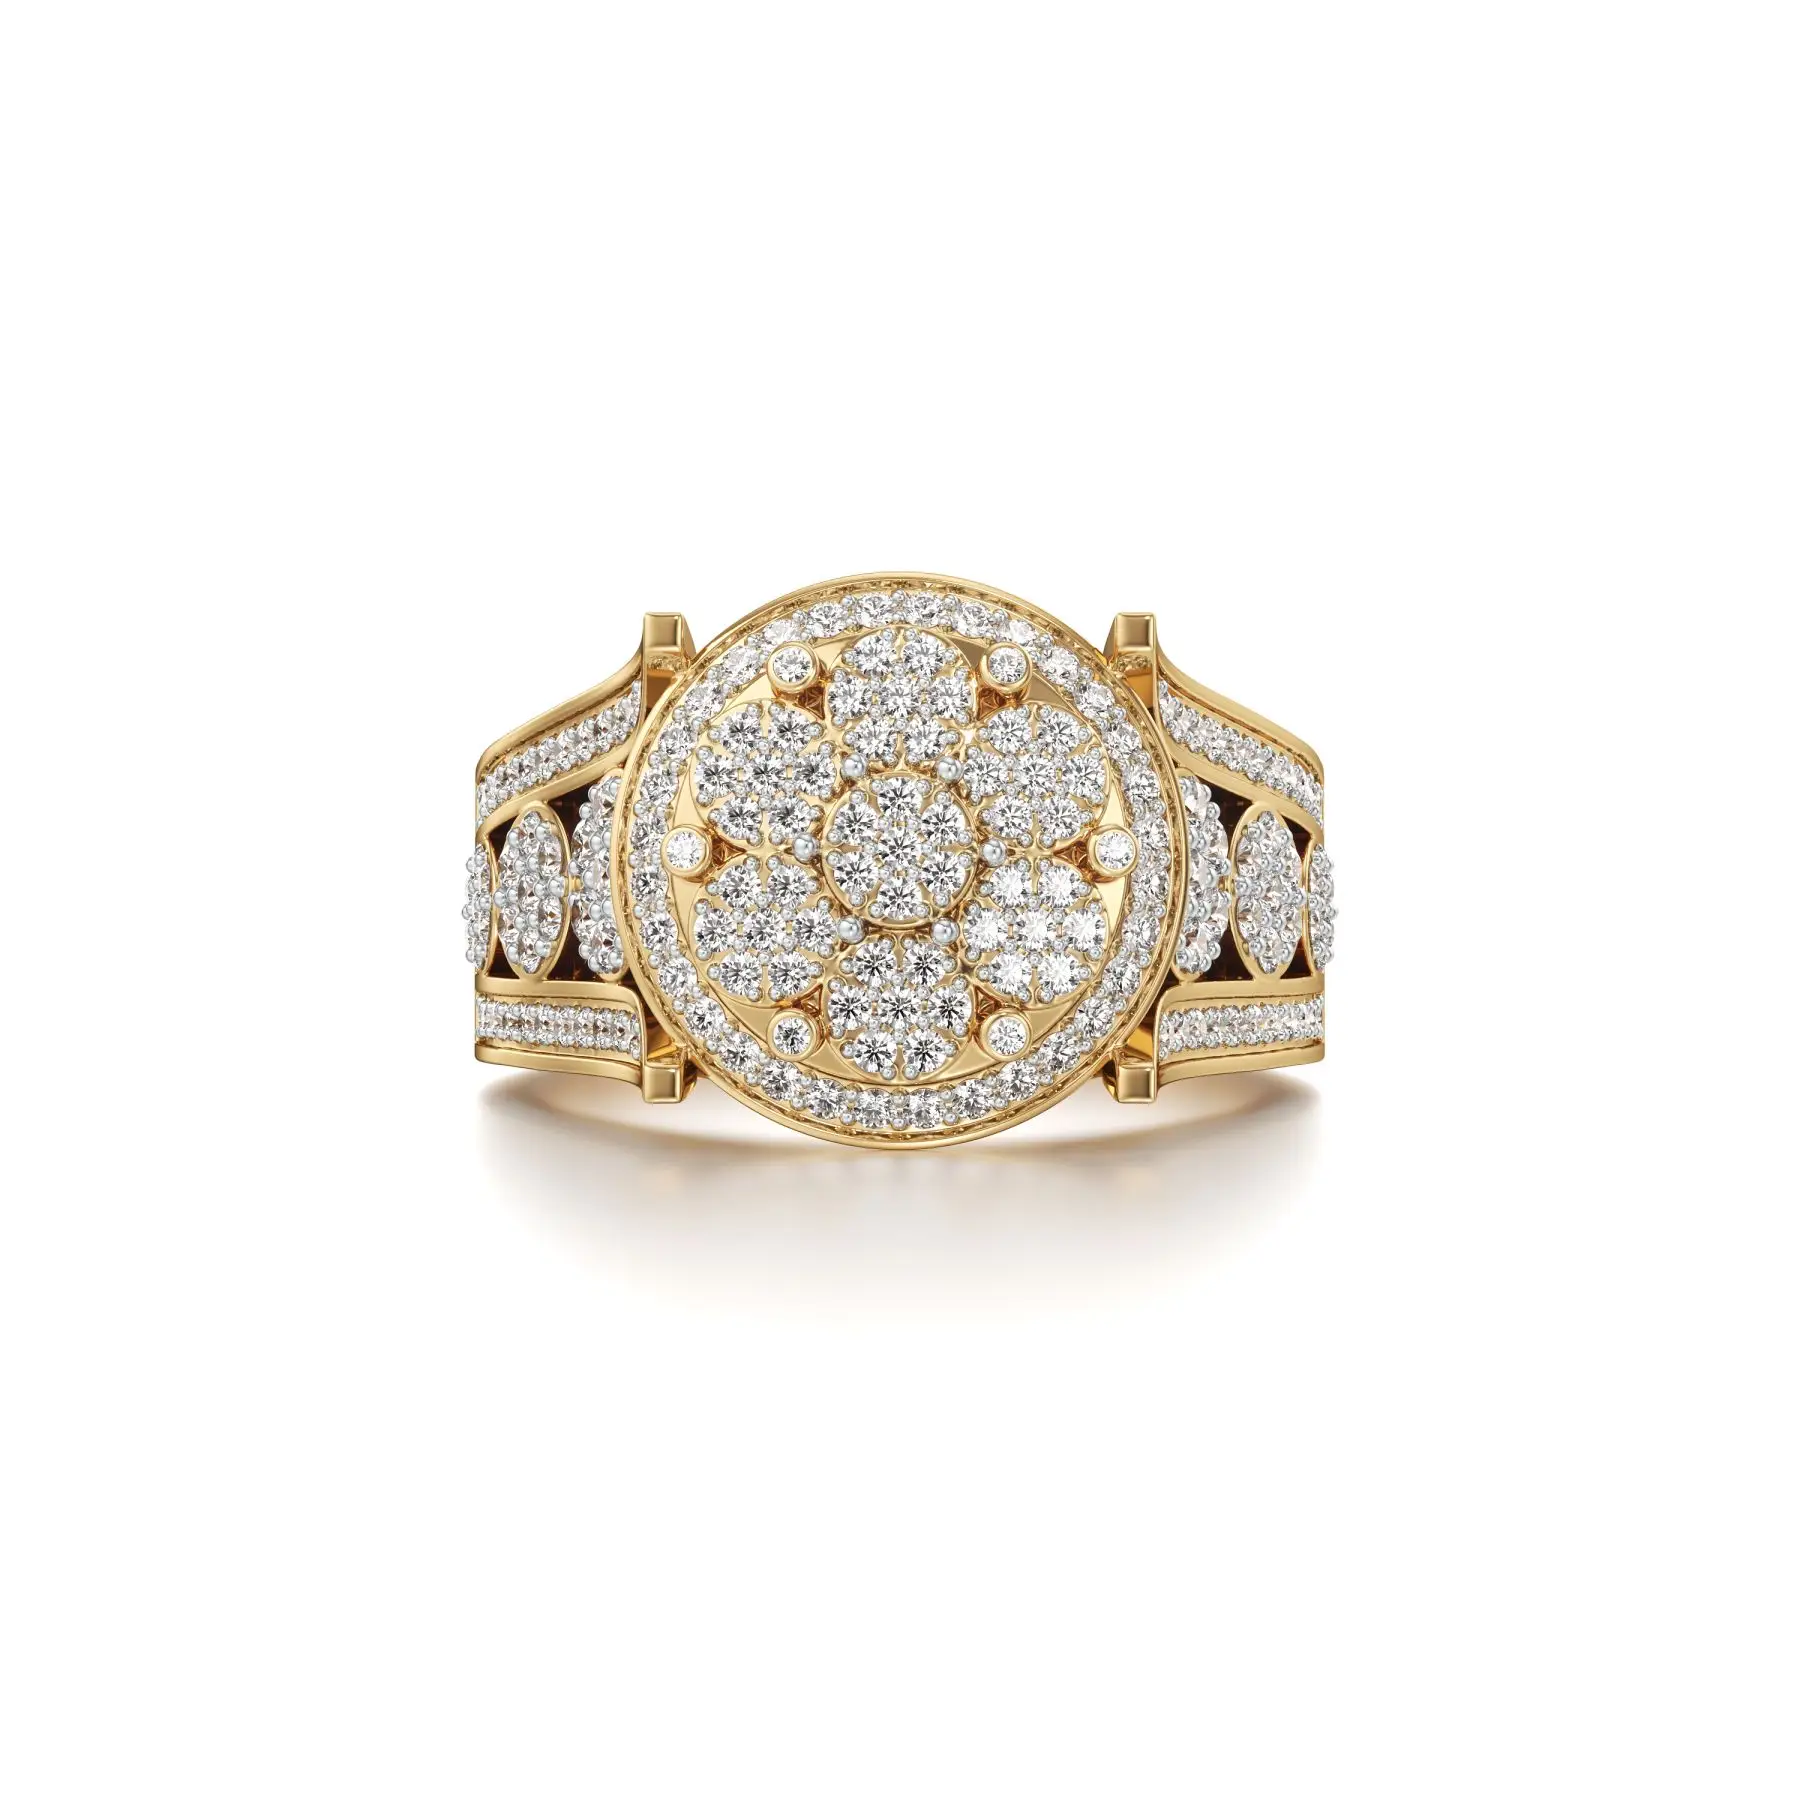 Brilliant Cluster Diamond Ring in Yellow 10k Gold